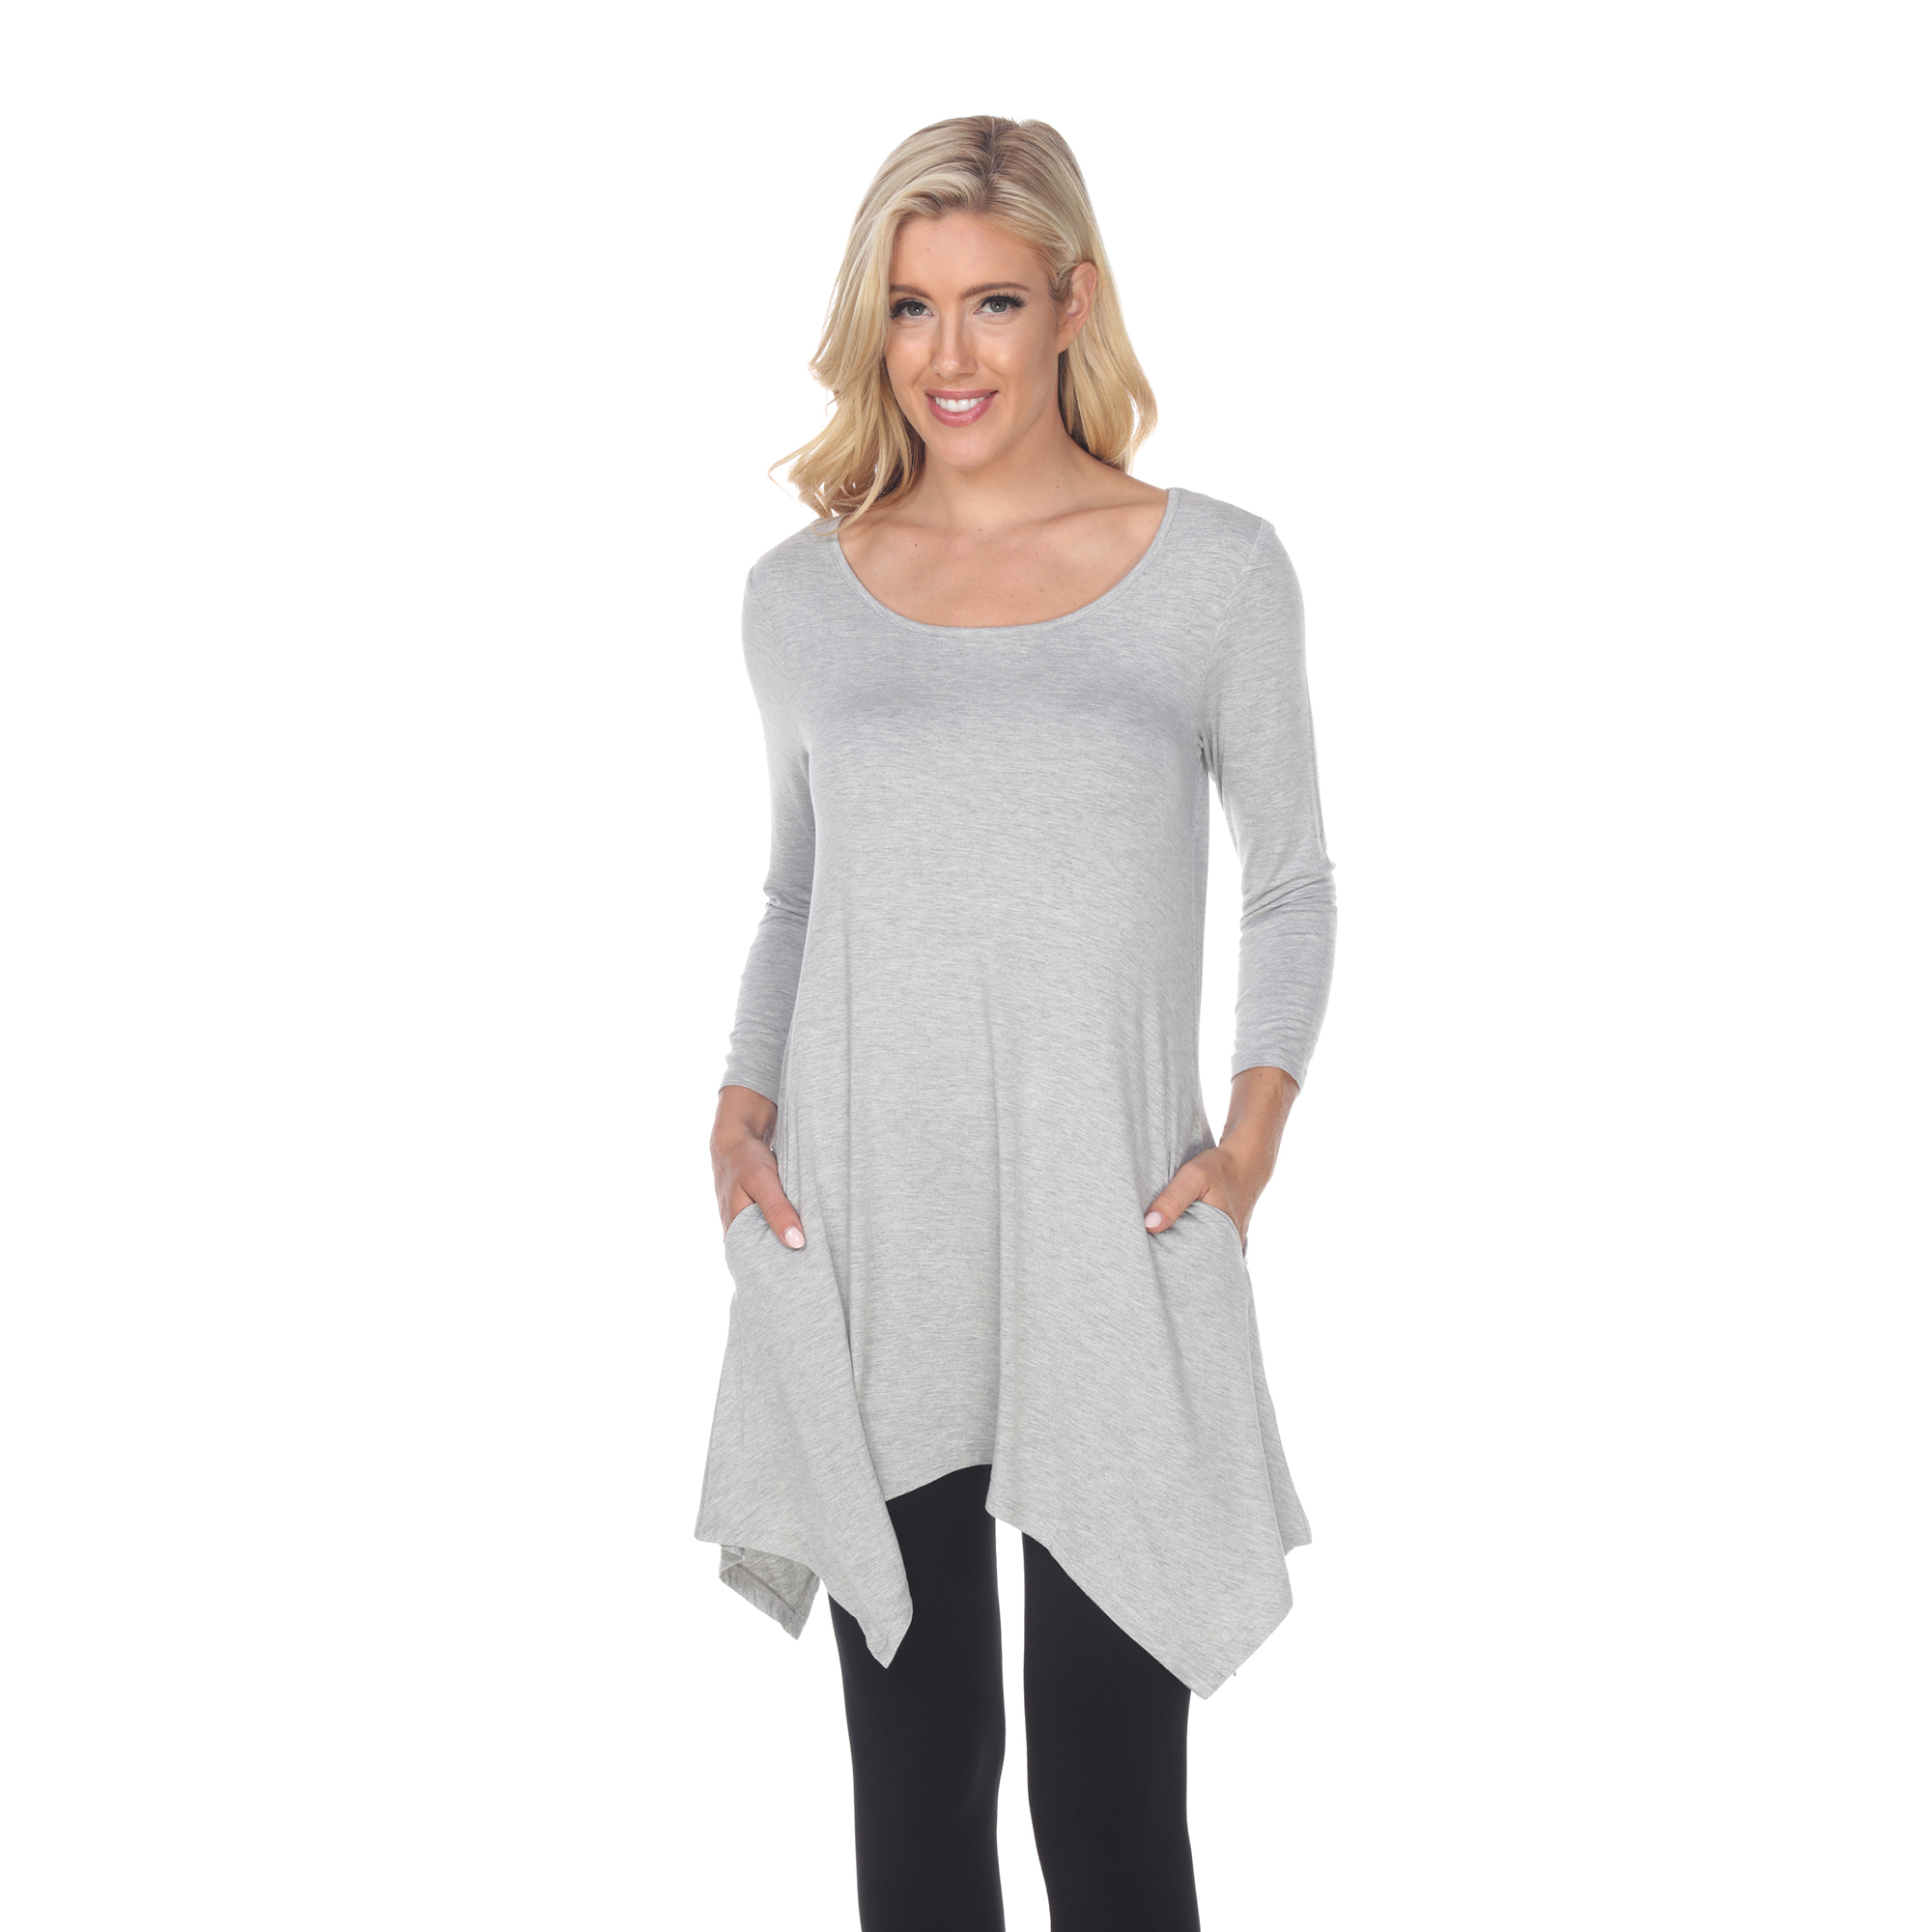 White Mark Women's Quarter Sleeve Tunic Top With Pockets - Heather Grey, 6X